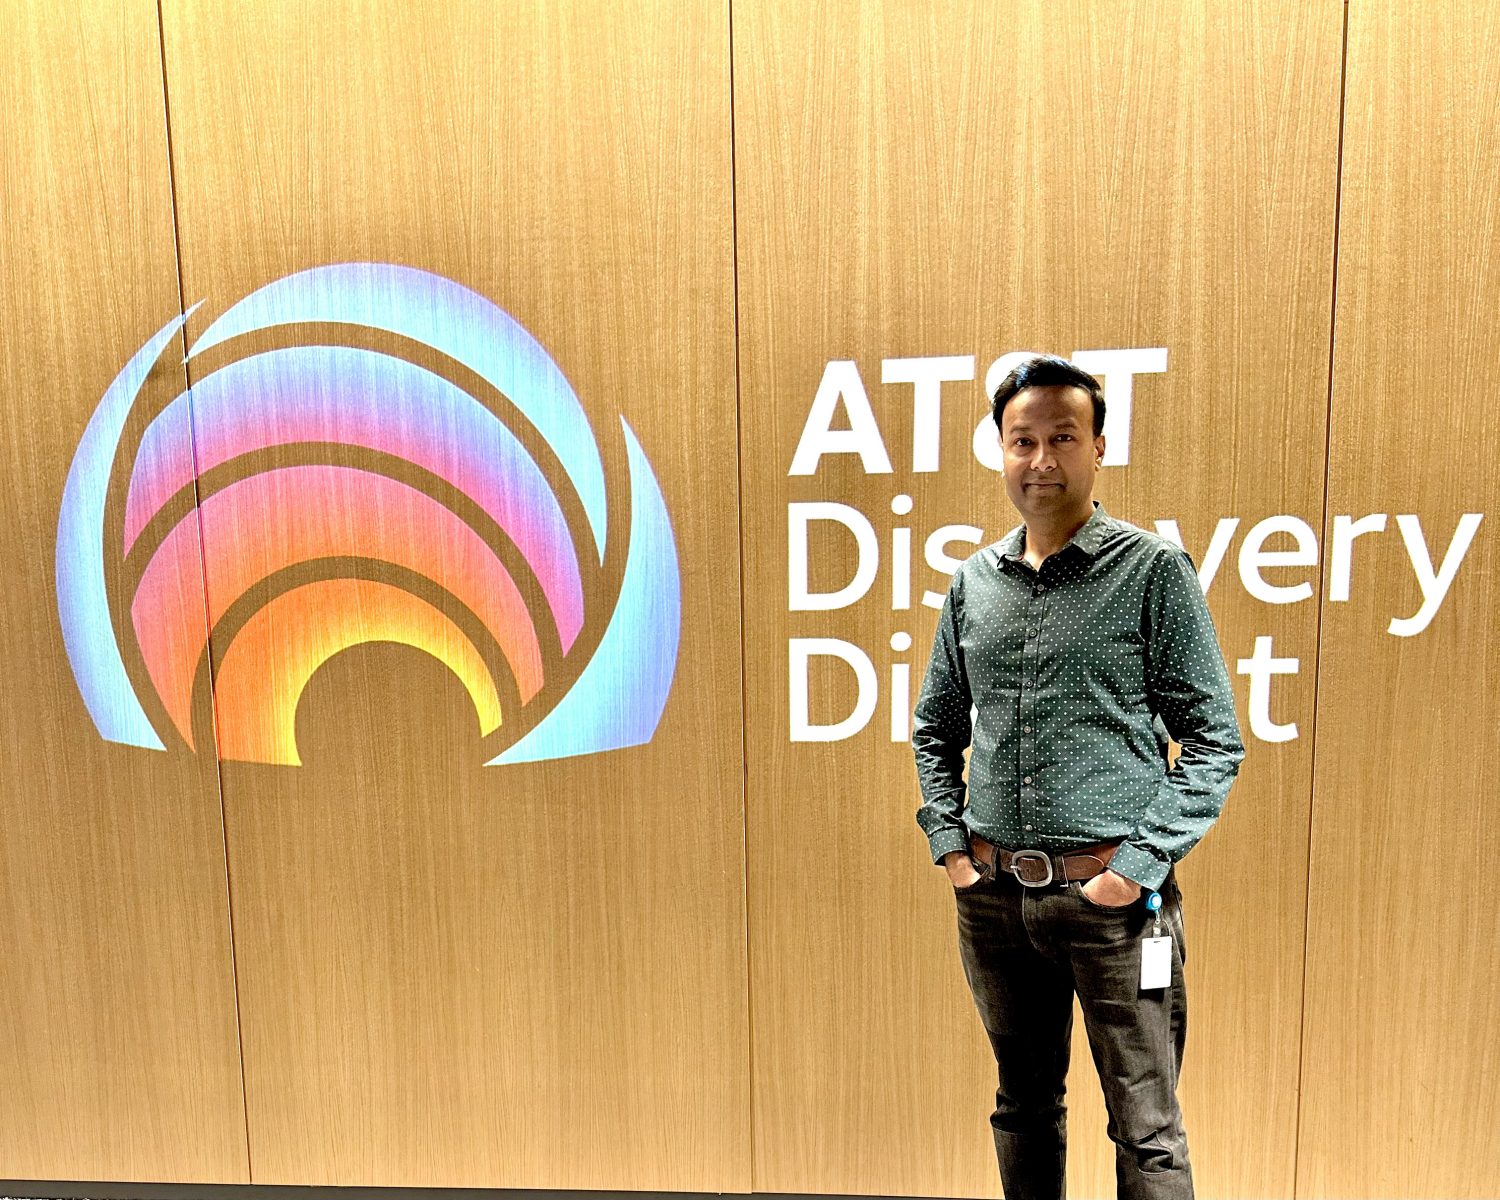 Kartik in front of the AT&T Discovery District sign